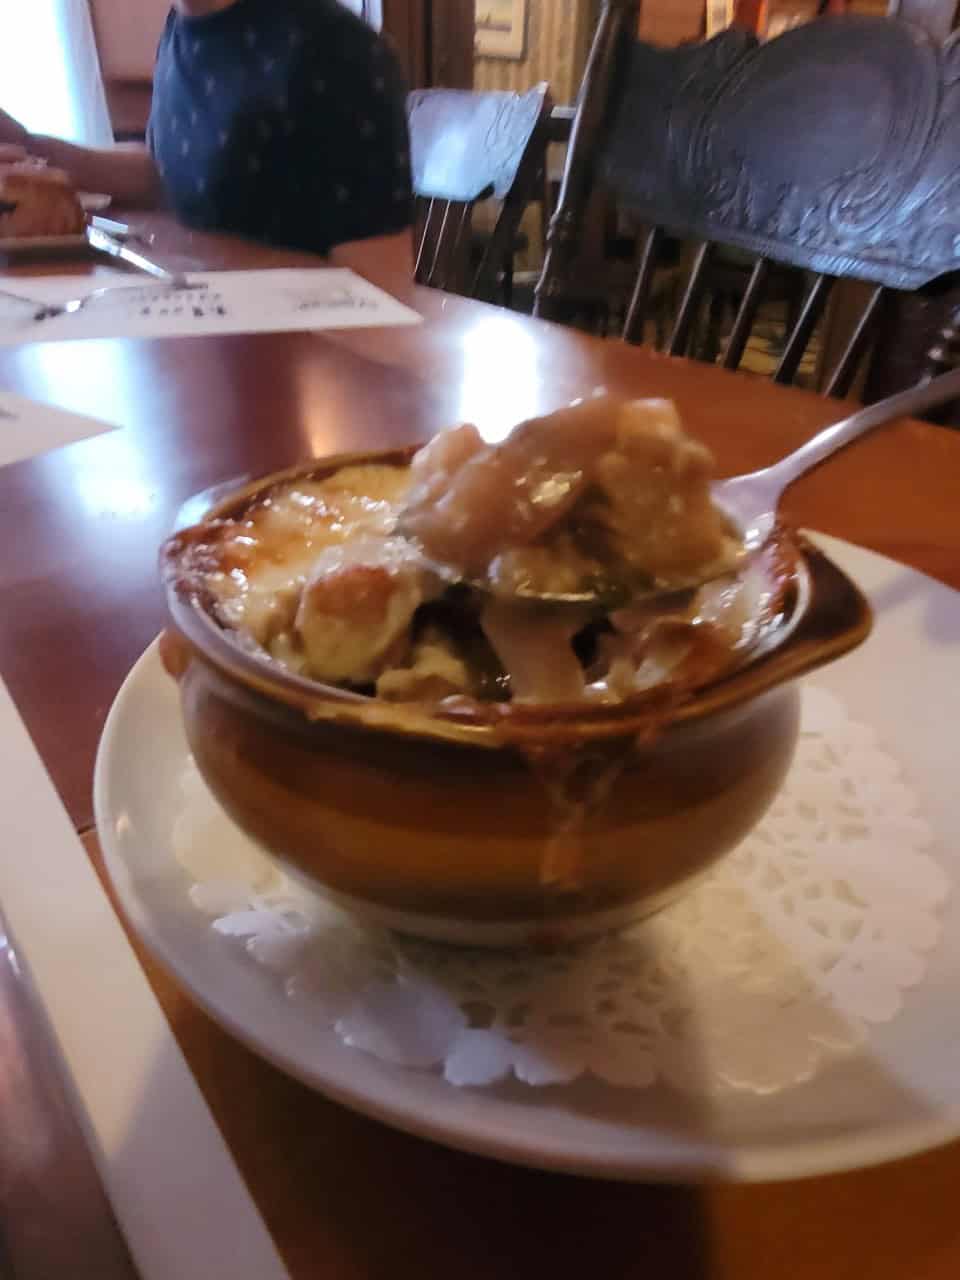 French Onion Soup at Hopkins Dining Parlour - Moose Jaw Saskatchewan - The French Onion Soup at Hopkins Dining Parlour is delicious and a must try menu item.
Check them out for lunch or dinner, you will not be disappointed!
Moose Jaw, Saskatchewan, Canada